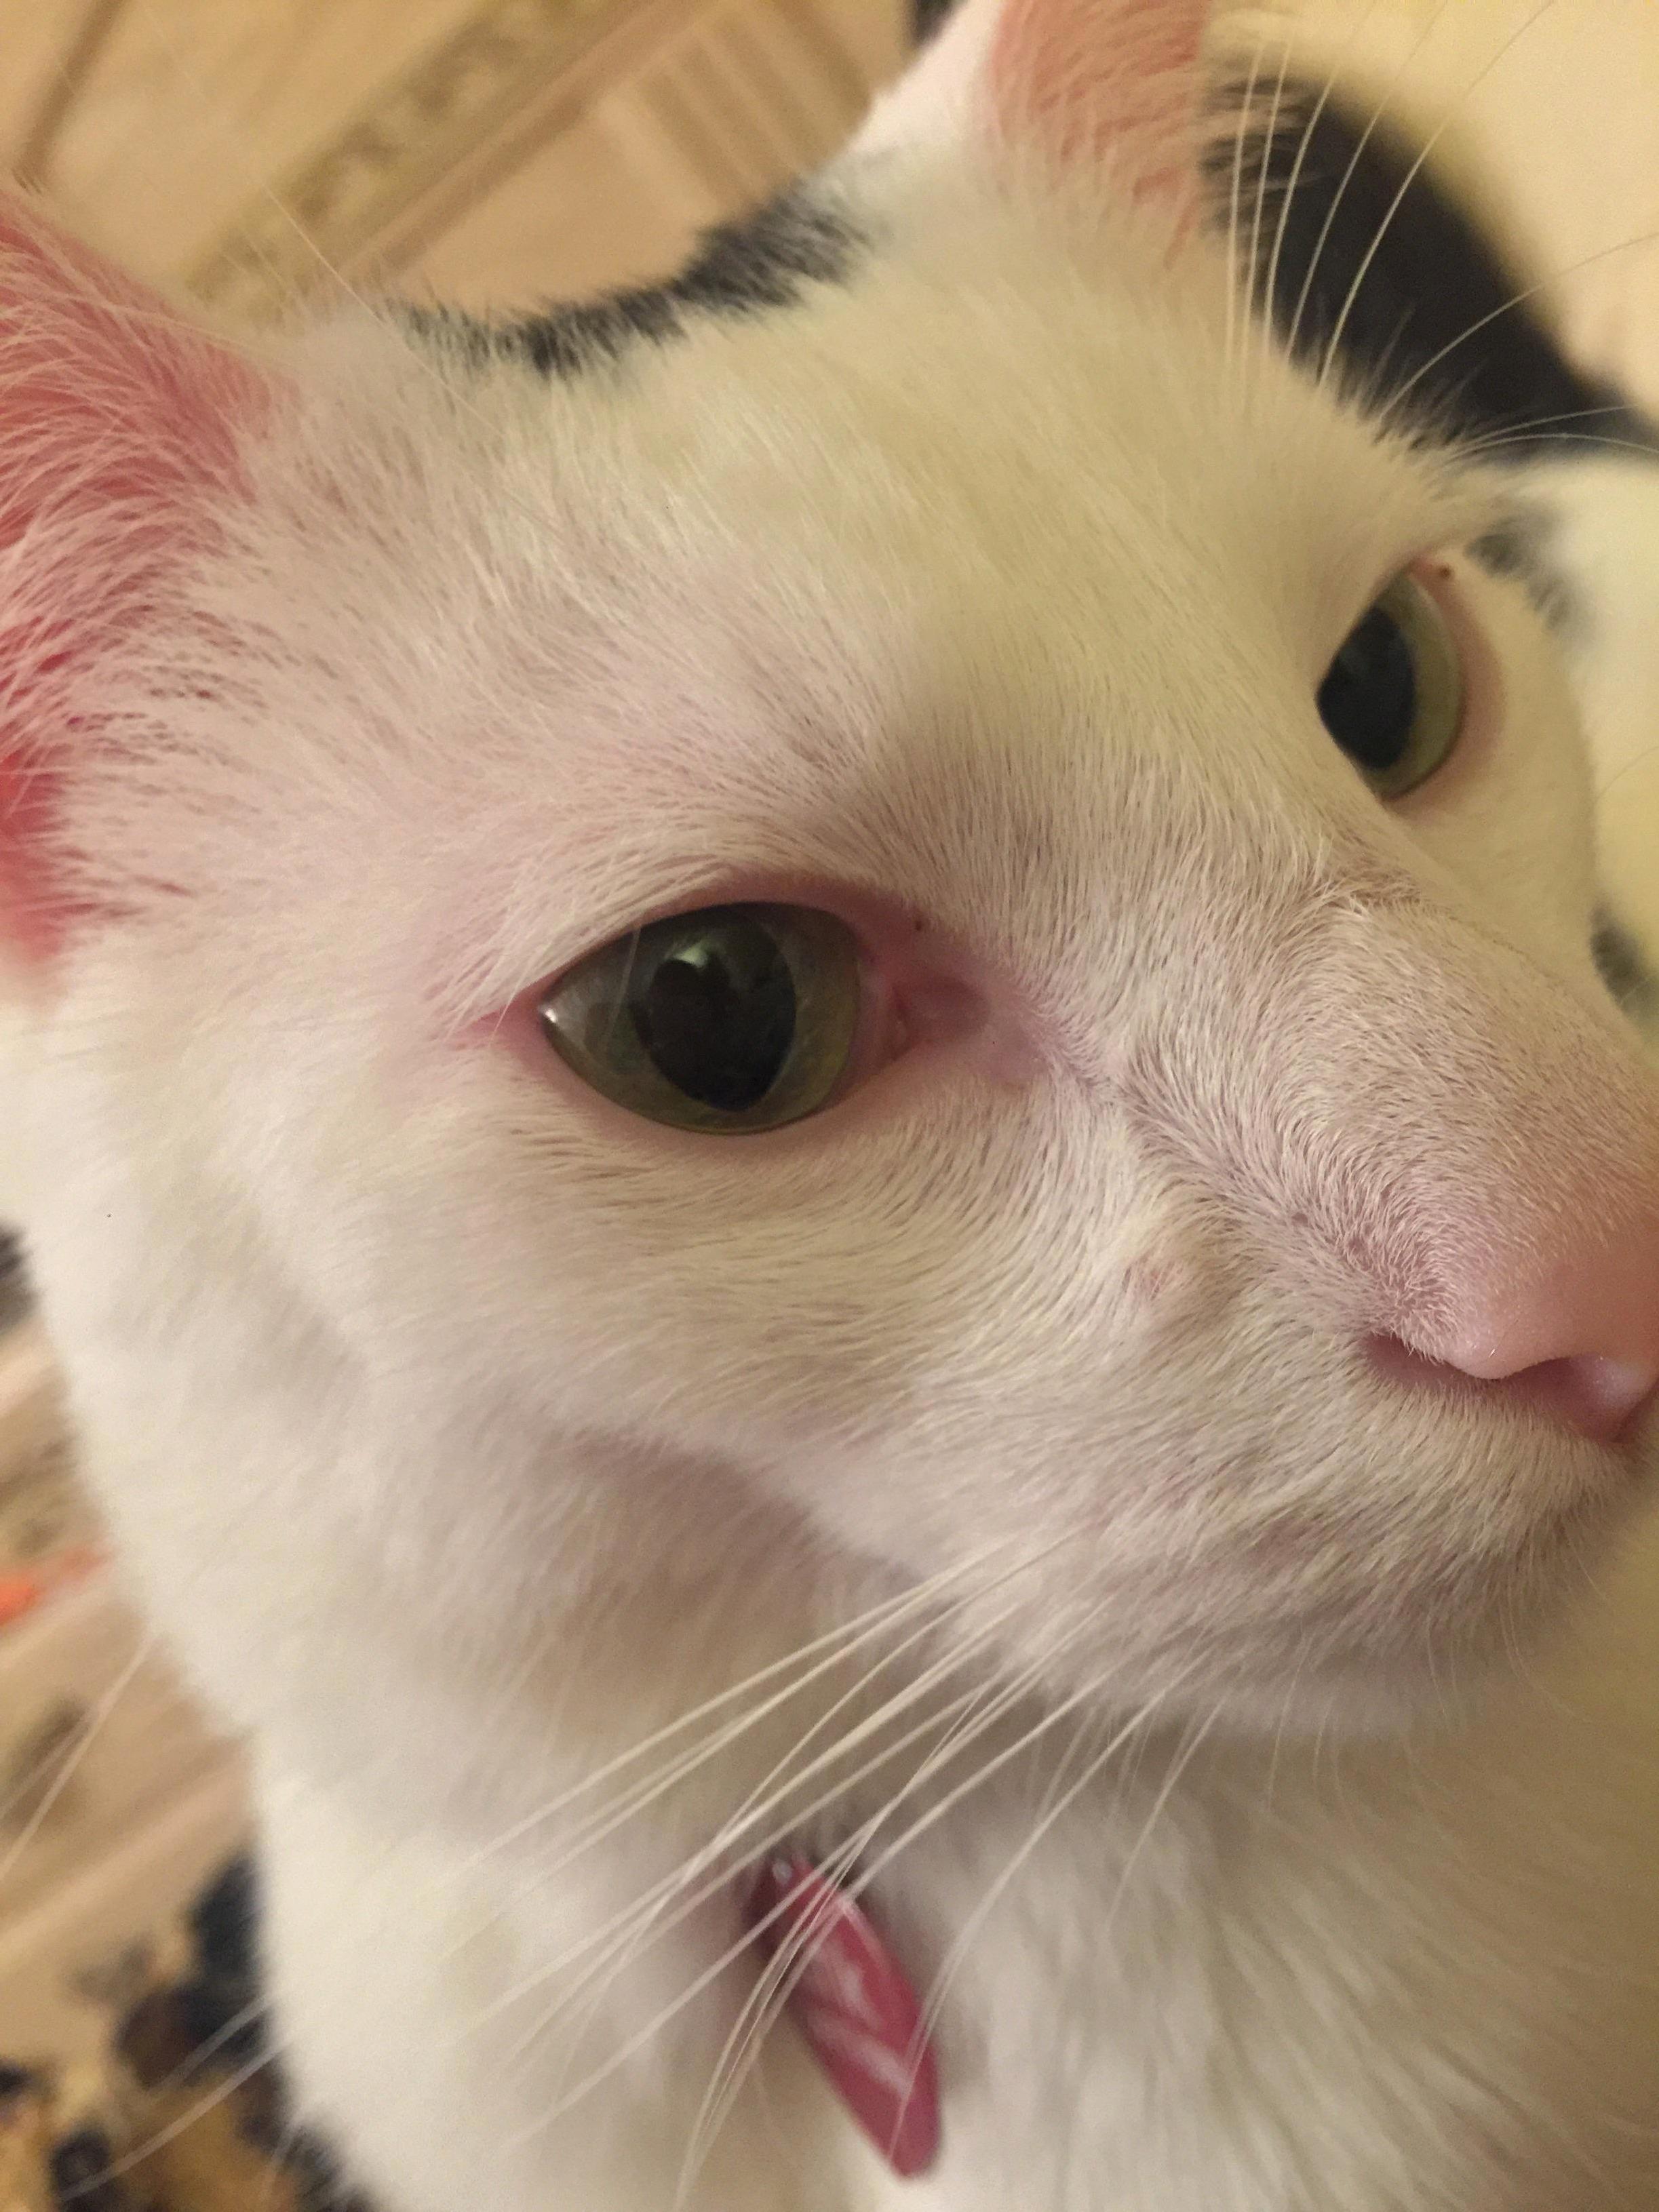 Is this some sort of cat acne this little bump by his nose and below his eye just appeared a couple days ago. it seems harmless but wonder if anyone else cat has this before.